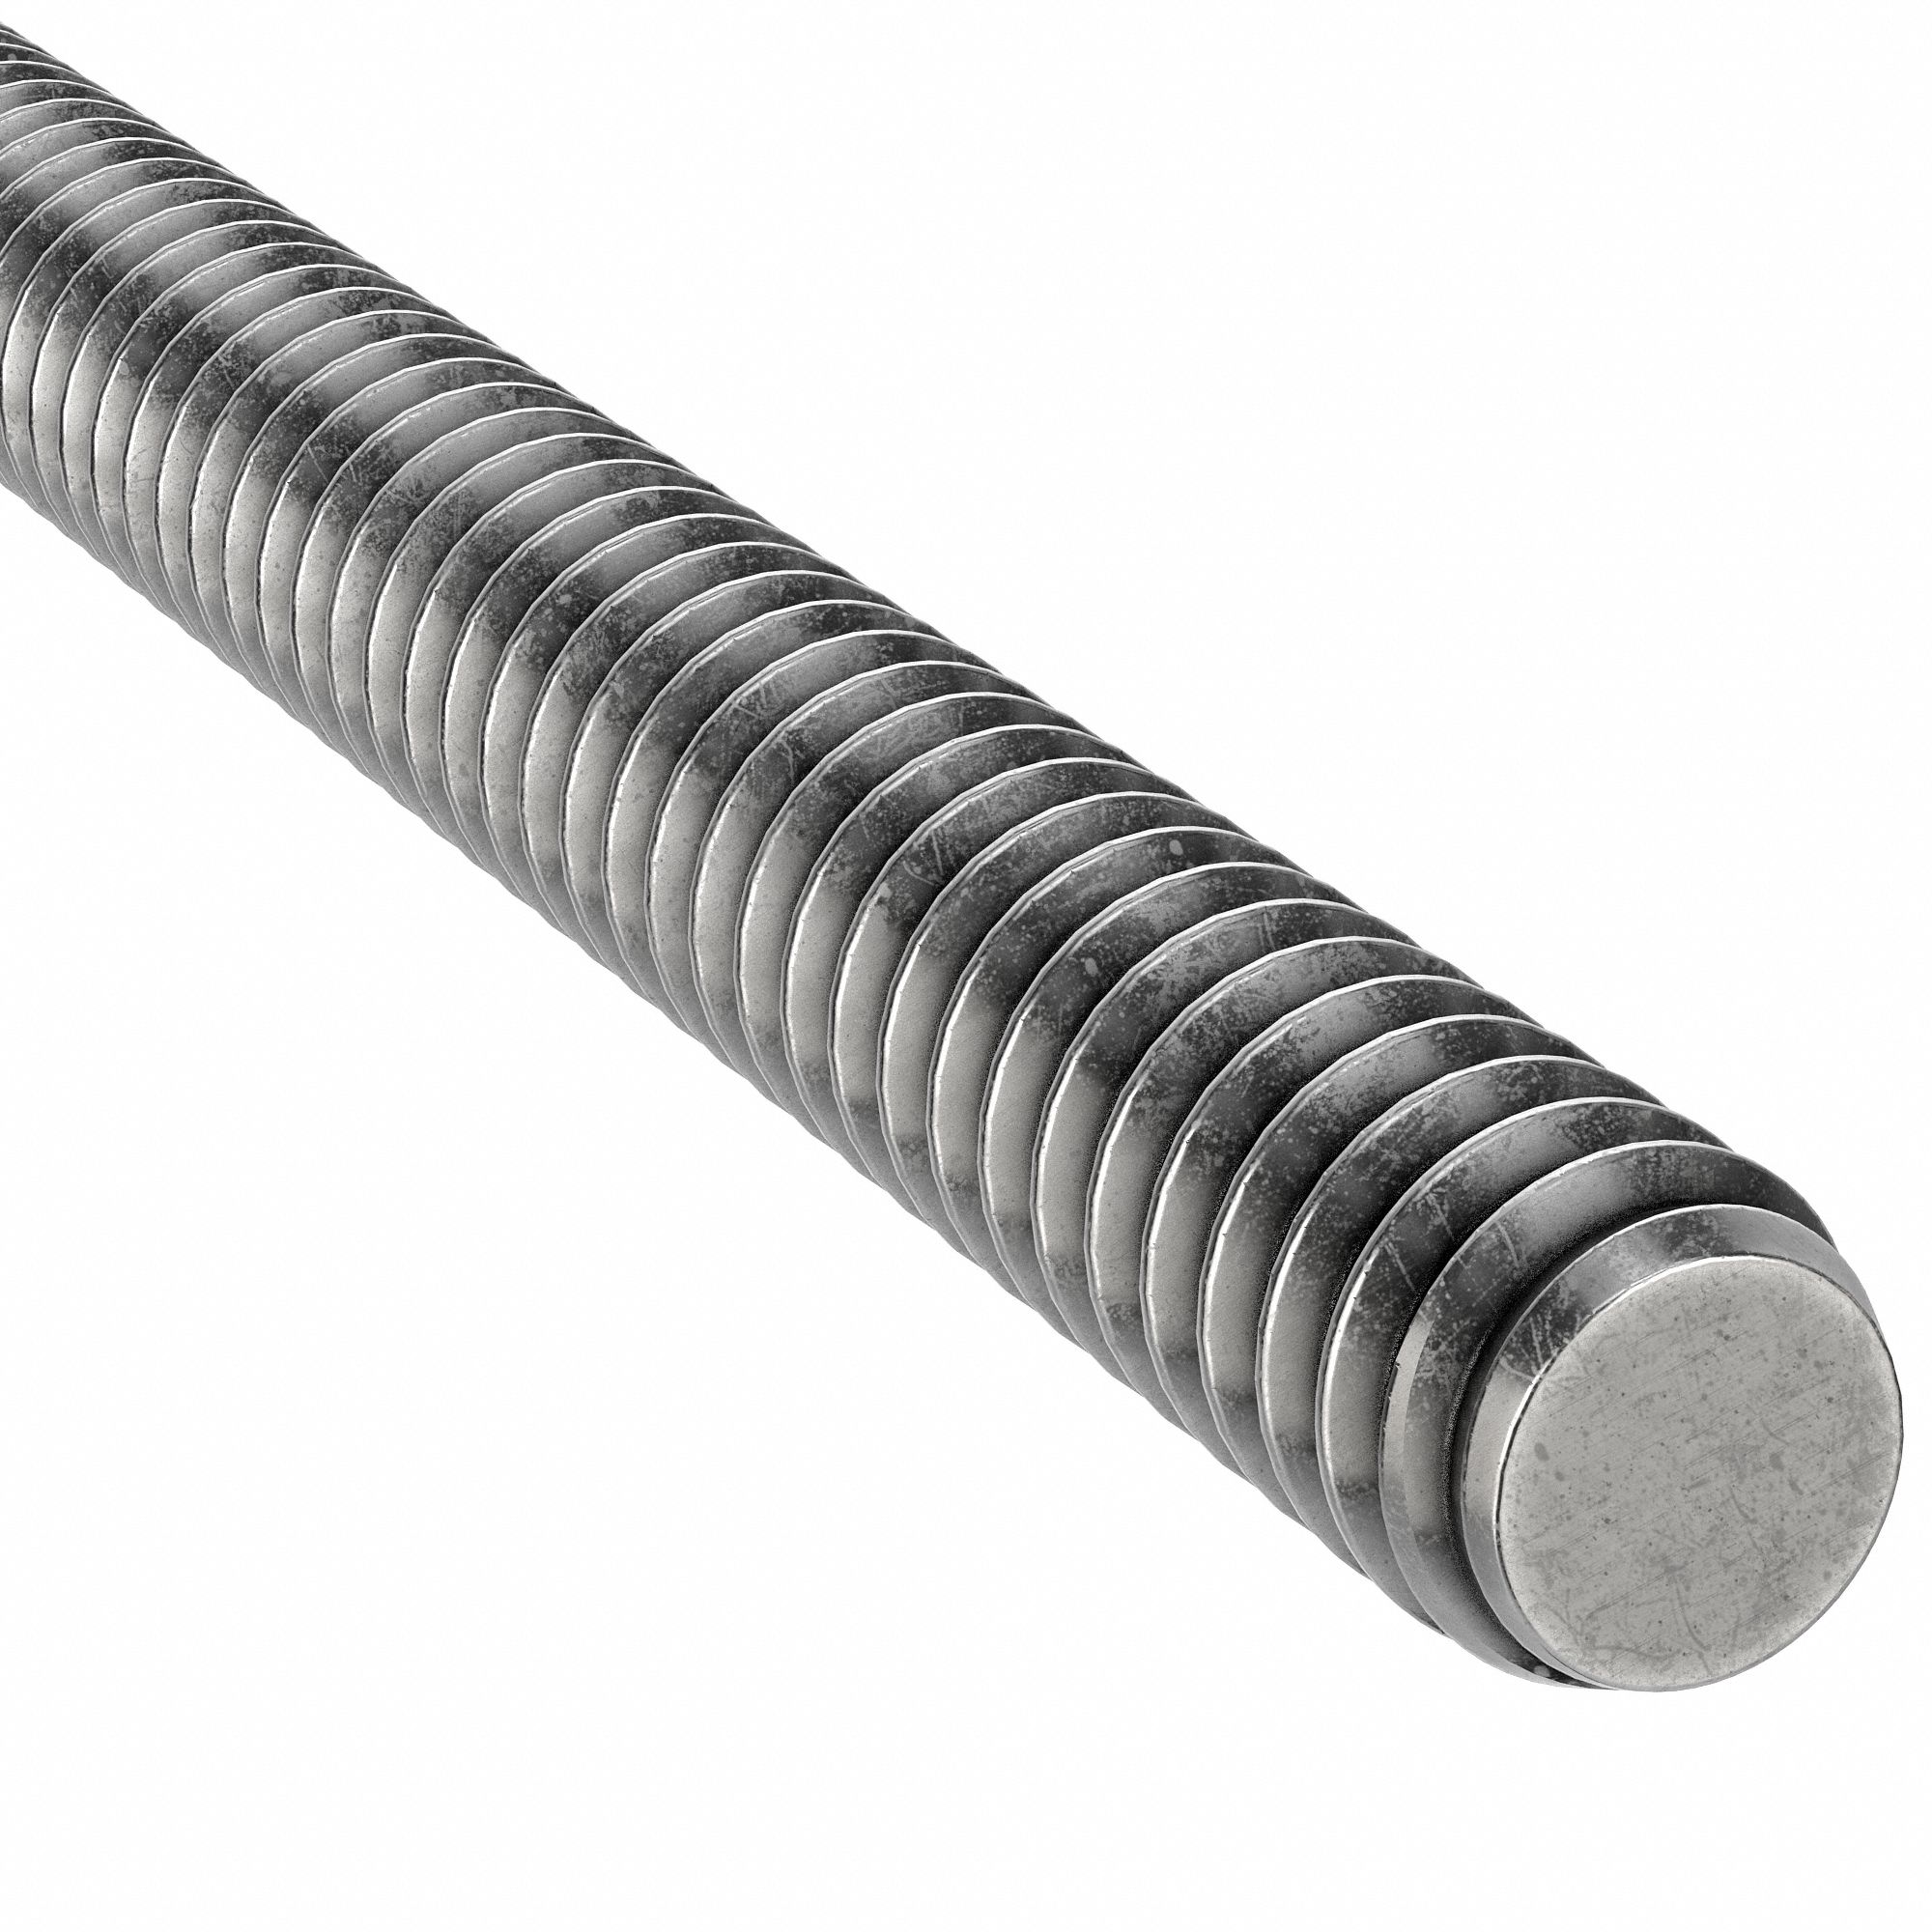 Pack of 5 4.5mm OD M2.5-0.45 Screw Size Stainless Steel Round Standoff 40mm Length, Female